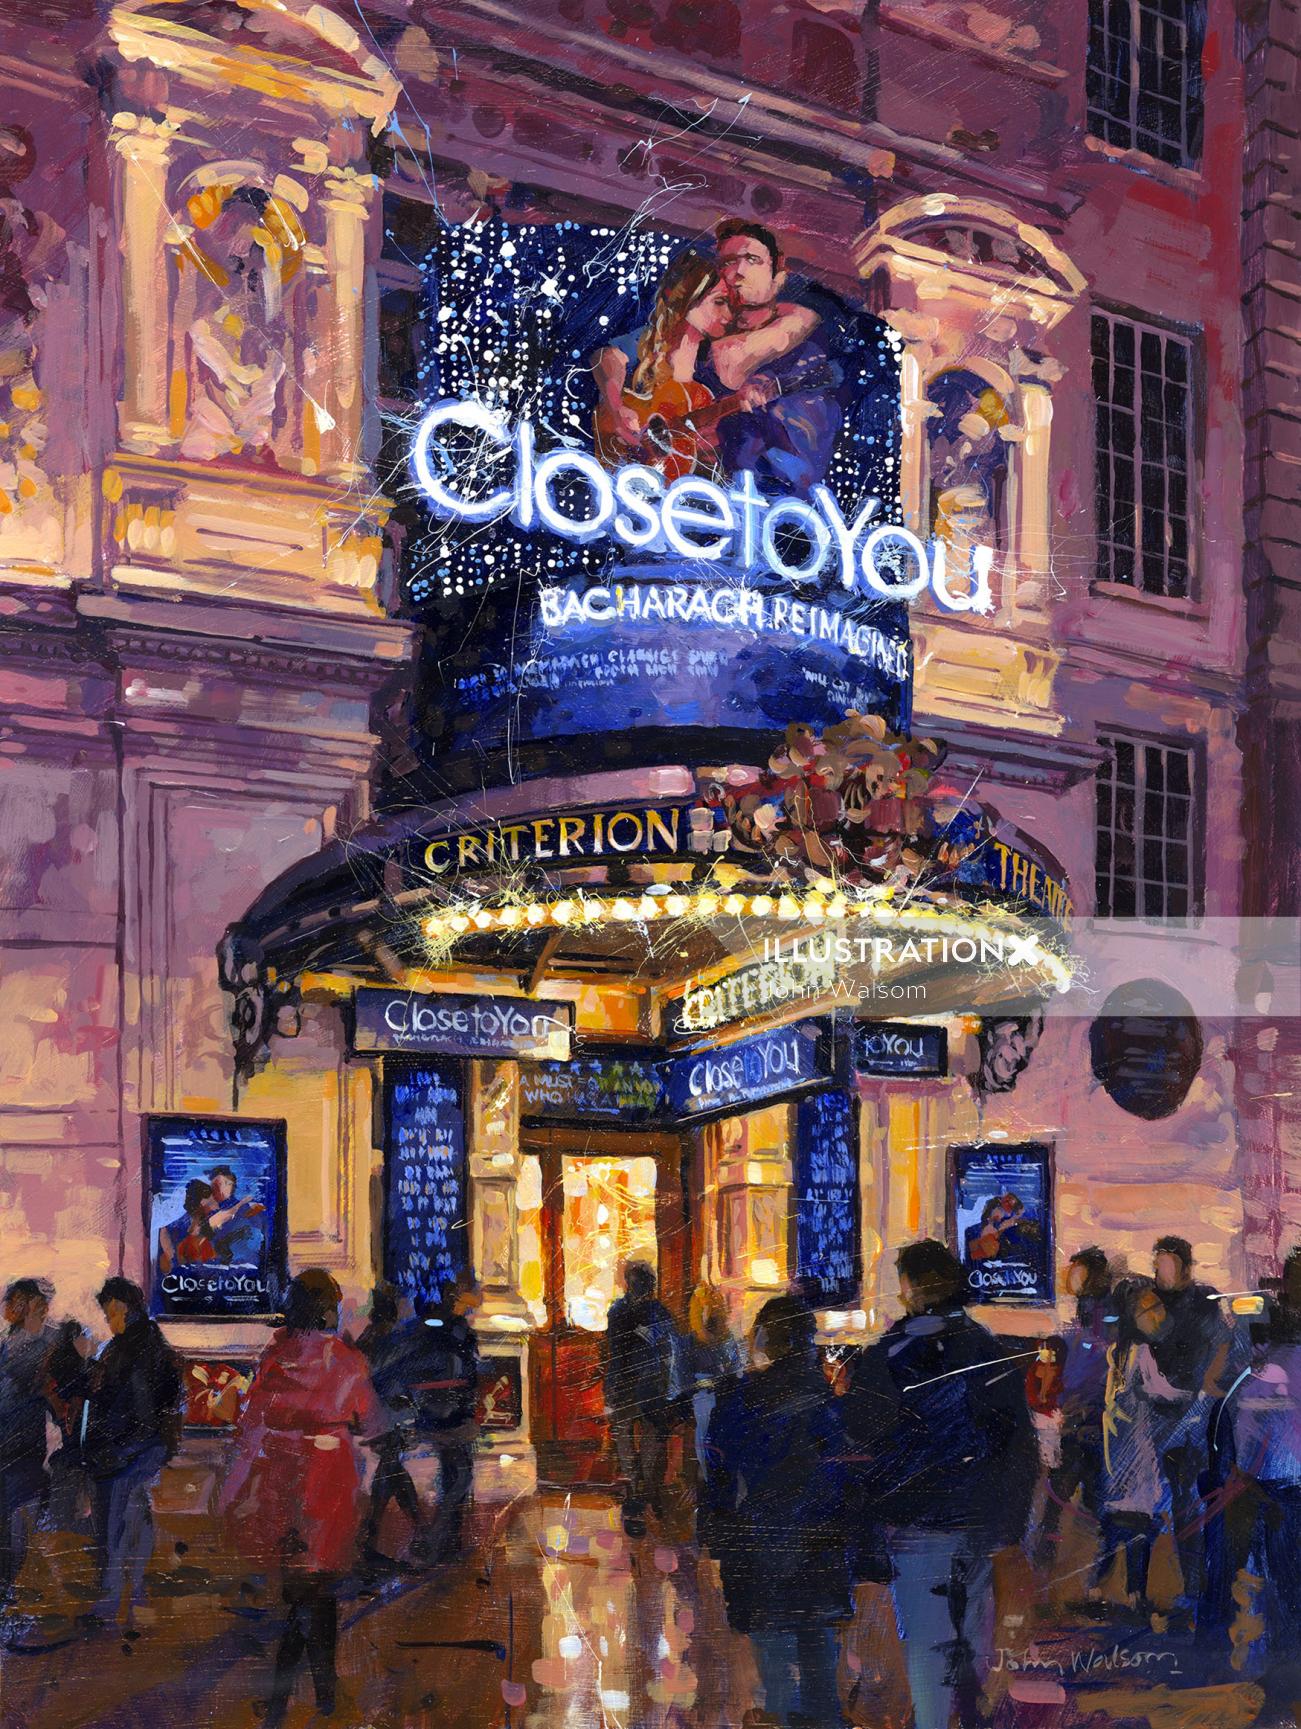 Painting of Criterion Theatre, London